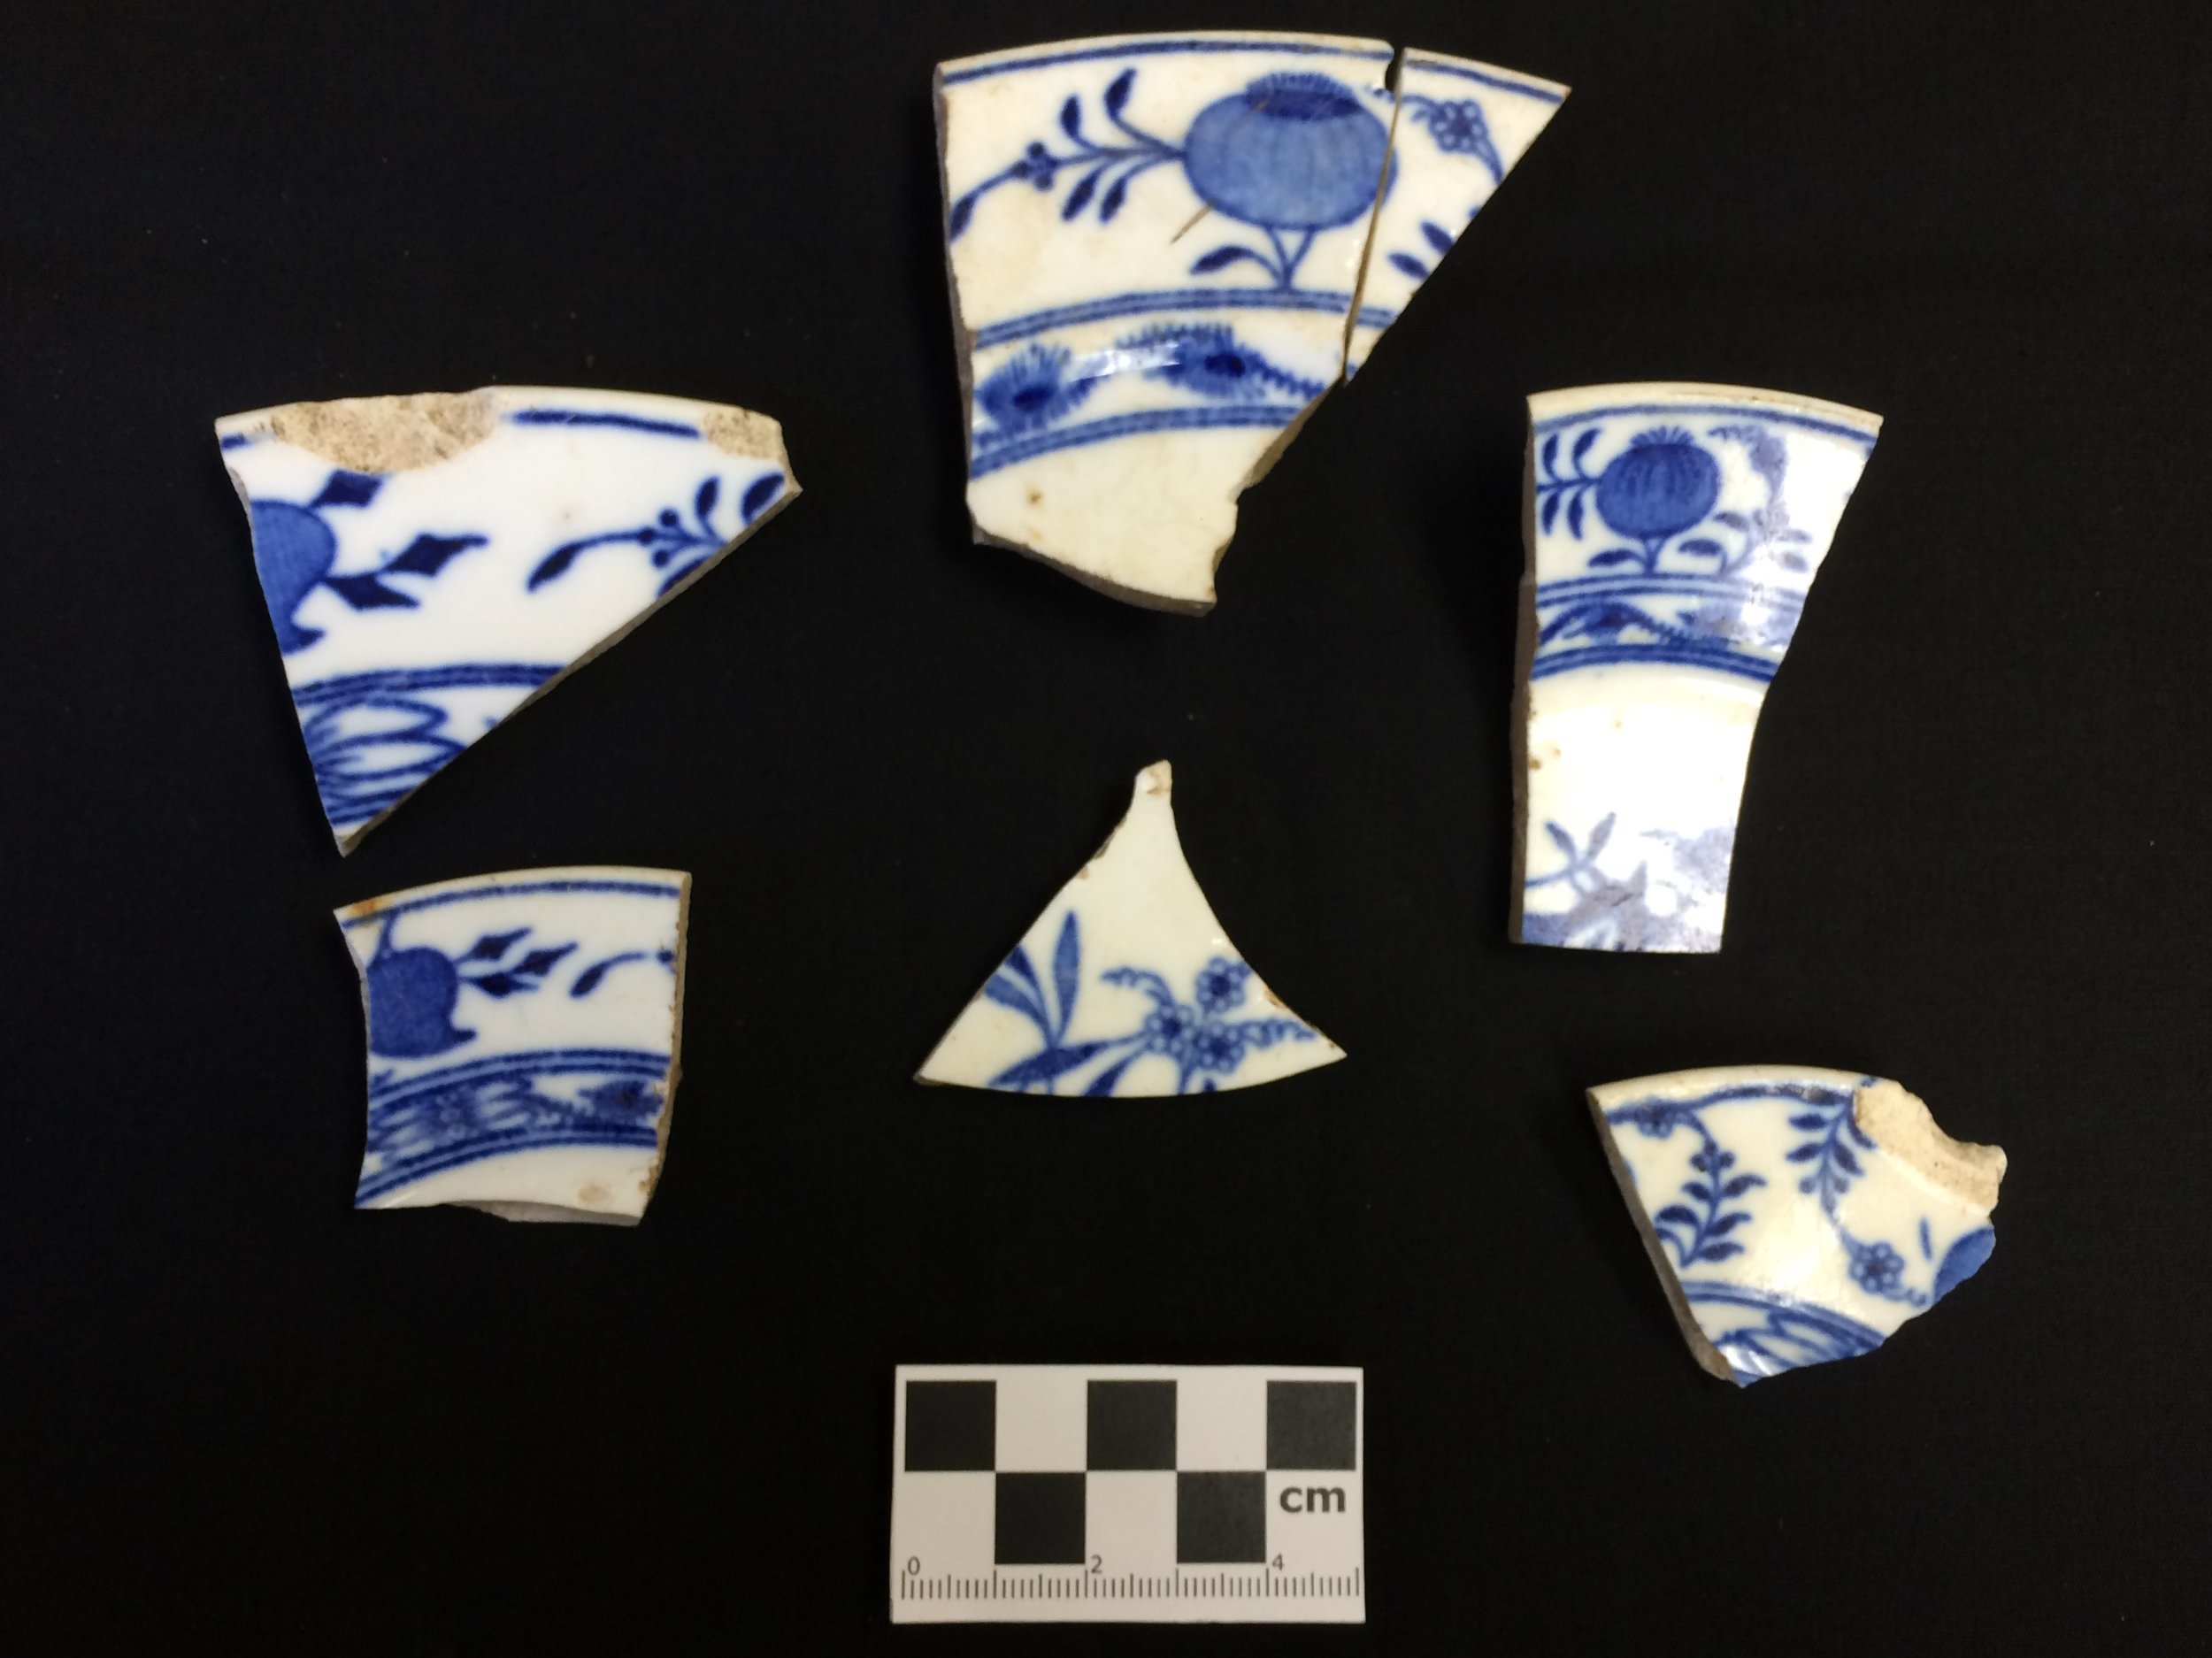  Some onion patterned ceramic fragments recovered on a wintry project not far from downtown Saratoga Springs. 